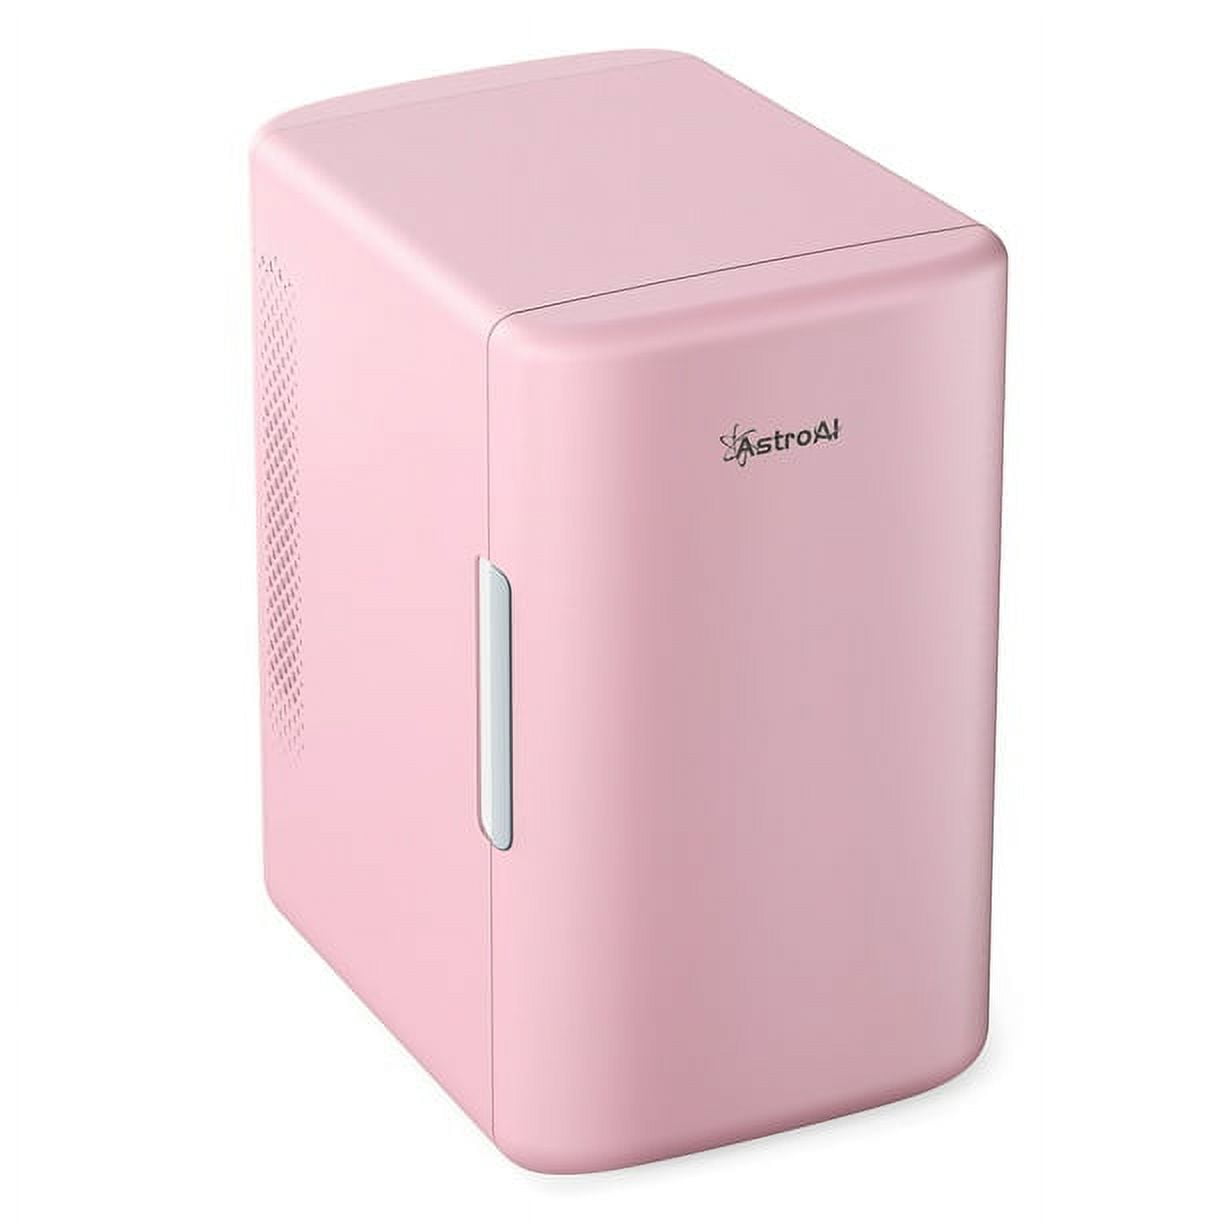 Mini Portable Fridge 6L, 8 Can Compact Refrigerator, Personal Cooler One Door, for Car, Home, Black for Gift